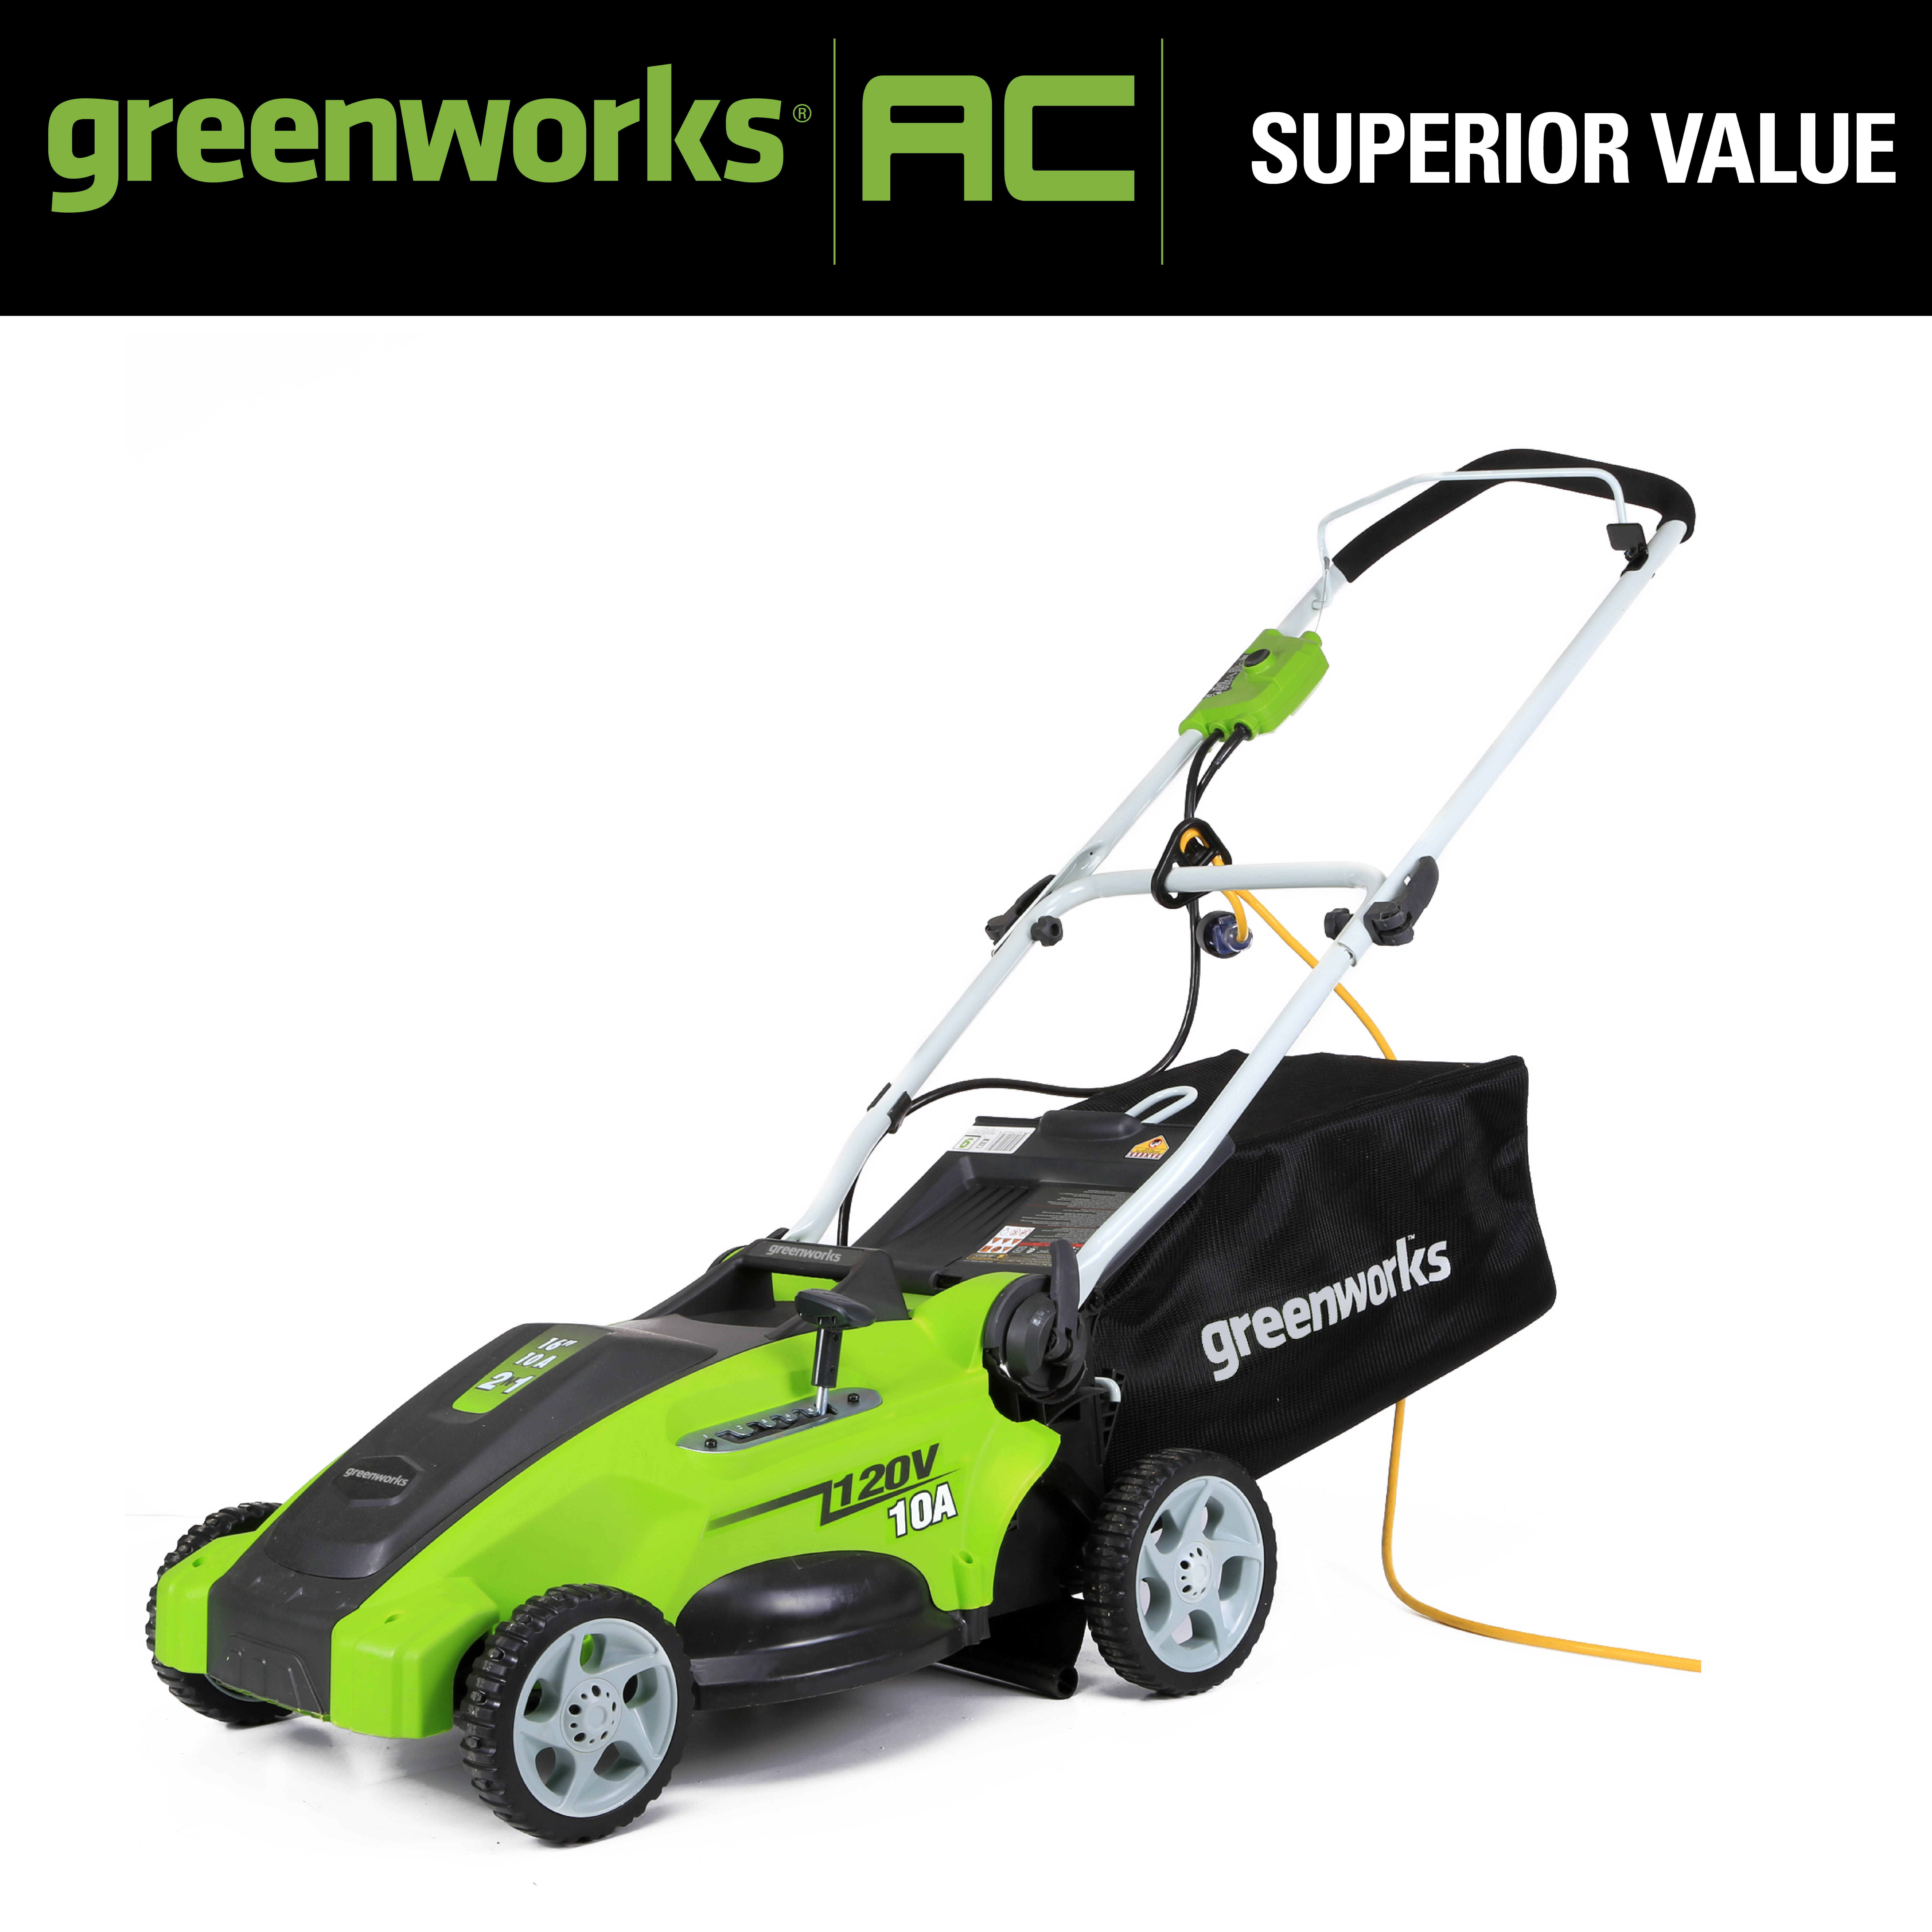 Greenworks 16" Corded Electric 10 Amp Walk-Behind Push Lawn Mower 25142 - image 3 of 11